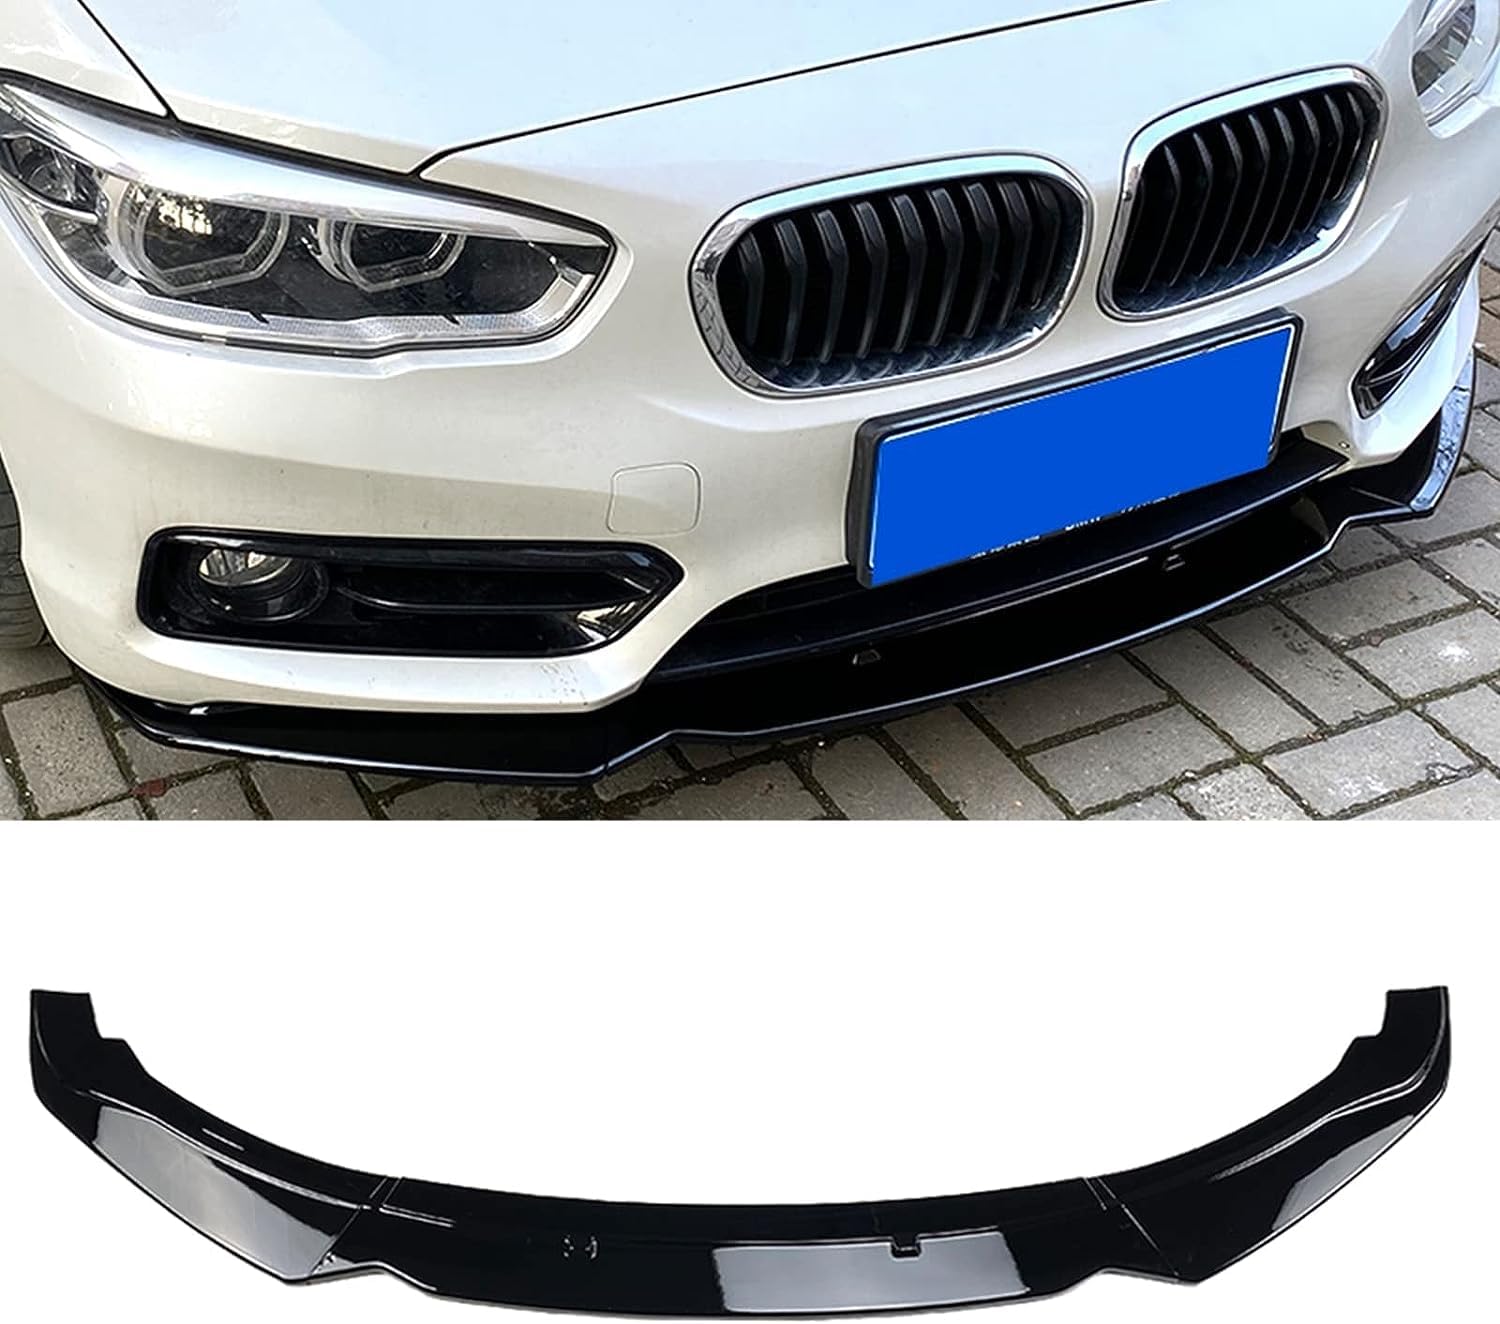 Auto Frontlippe Frontspoiler für BMW 1 Series F20 F21 116i 118i 120i 2015-2019,Frontlippe Spoiler Protector Car Styling Karosserie-Anbauteile, A/Black von AMAIR